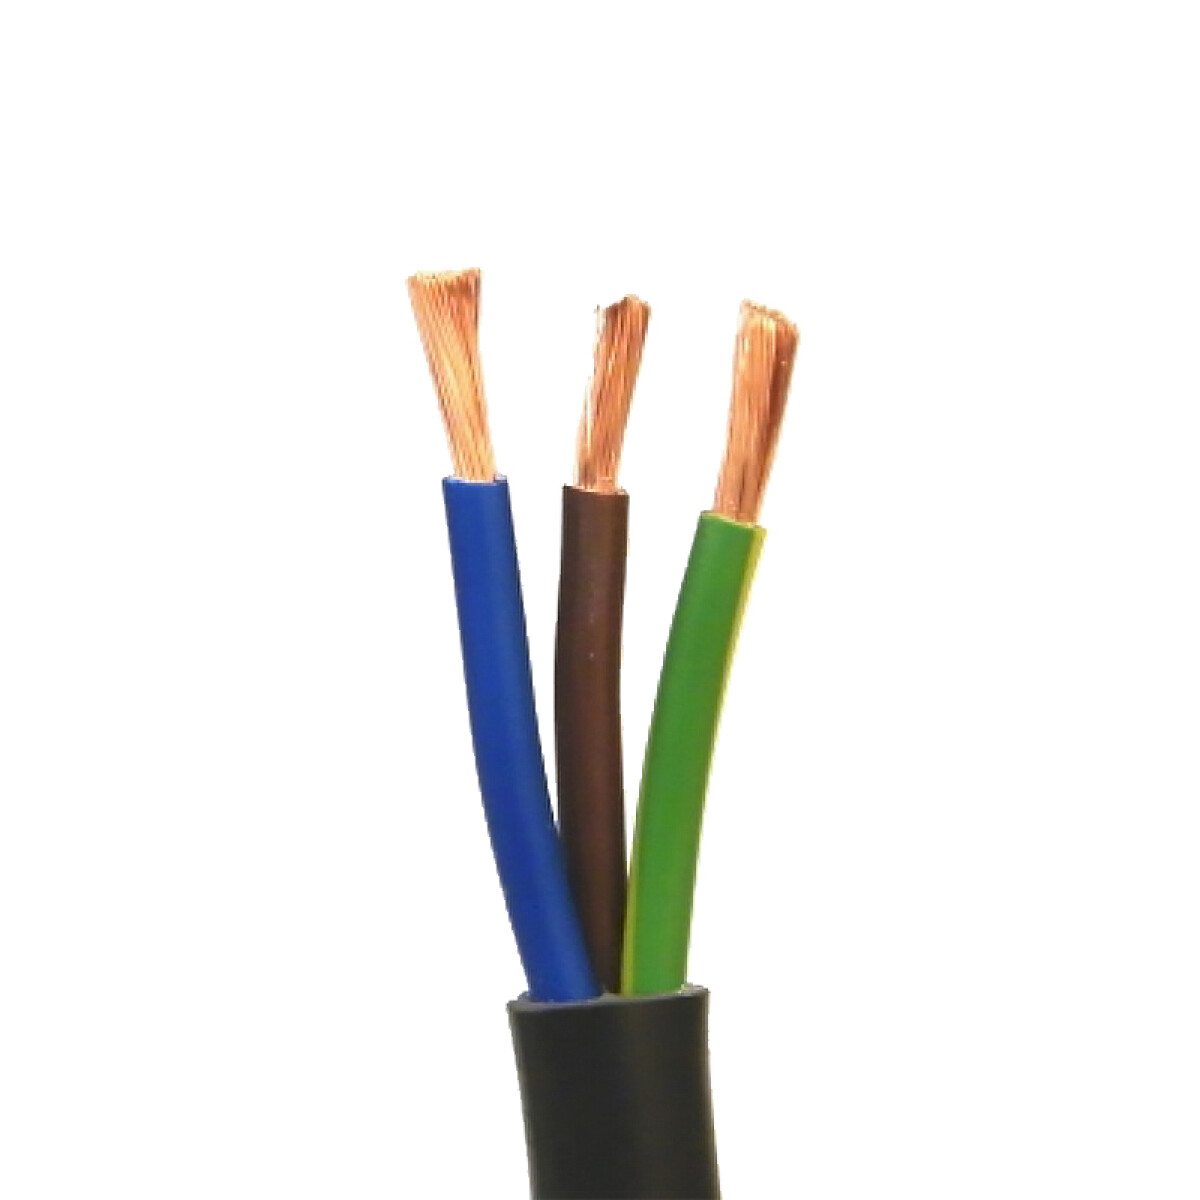 Cable bajo goma negro 3x2mm² - Rollo 100 mts. - N06136 